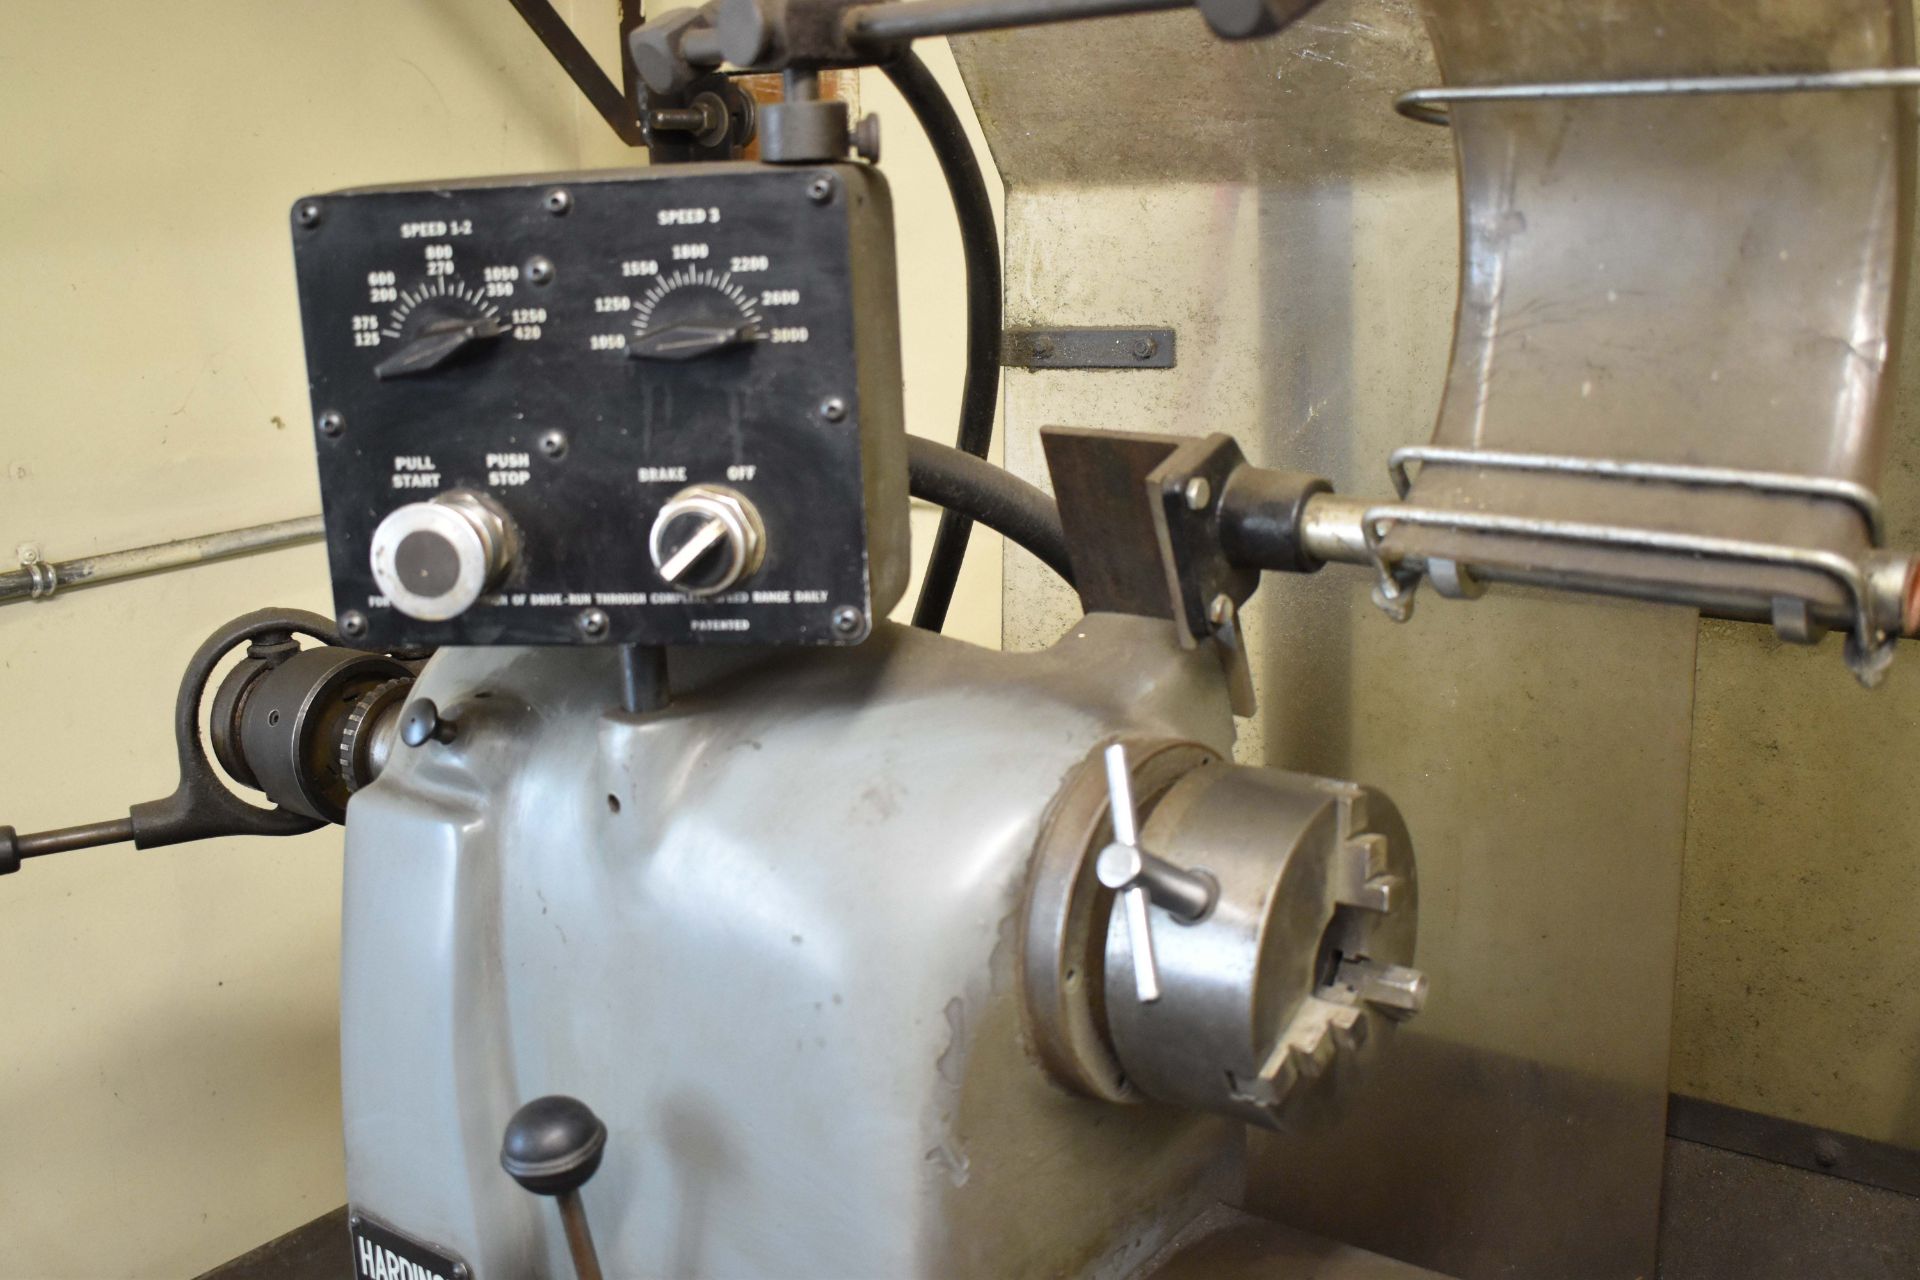 HARDINGE SUPER-PRECISION TURRET LATHE WITH 12" SWING OVER BED, 12" BETWEEN CENTERS, SPEEDS TO 3000 - Image 2 of 5